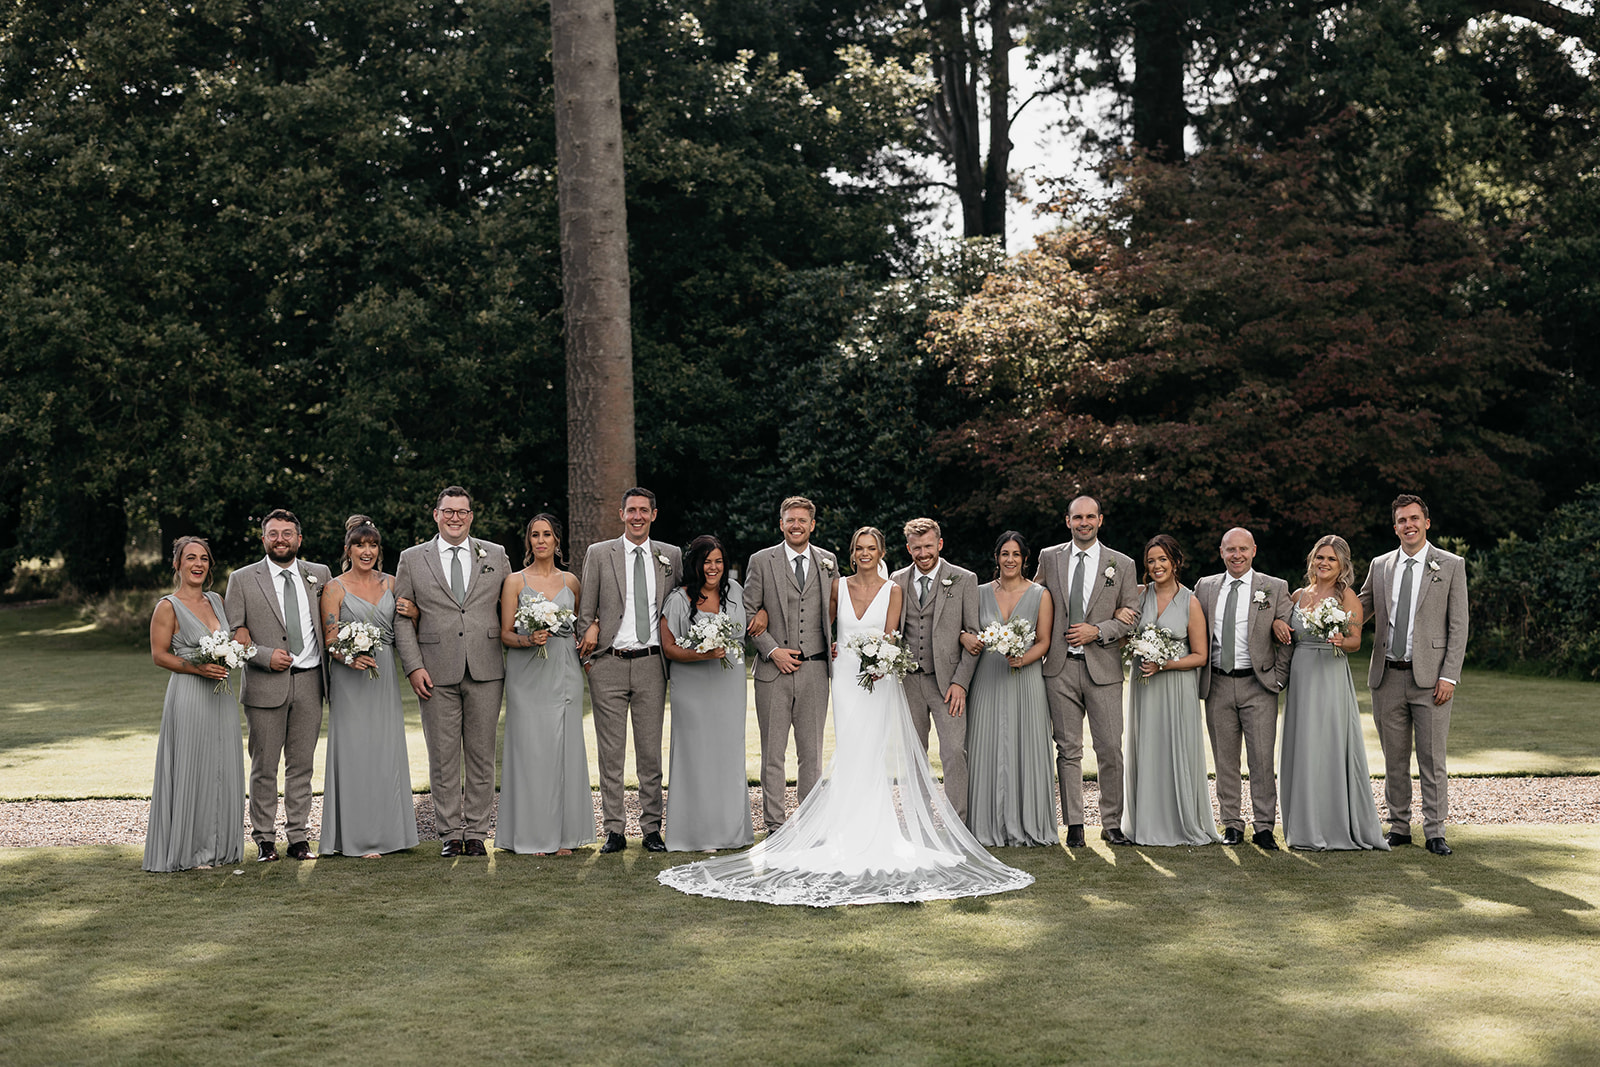 A bride and groom stand in the middle of their bridal party with ushers wearing grey suits and sage green ties and the bridesmaids in green dresses